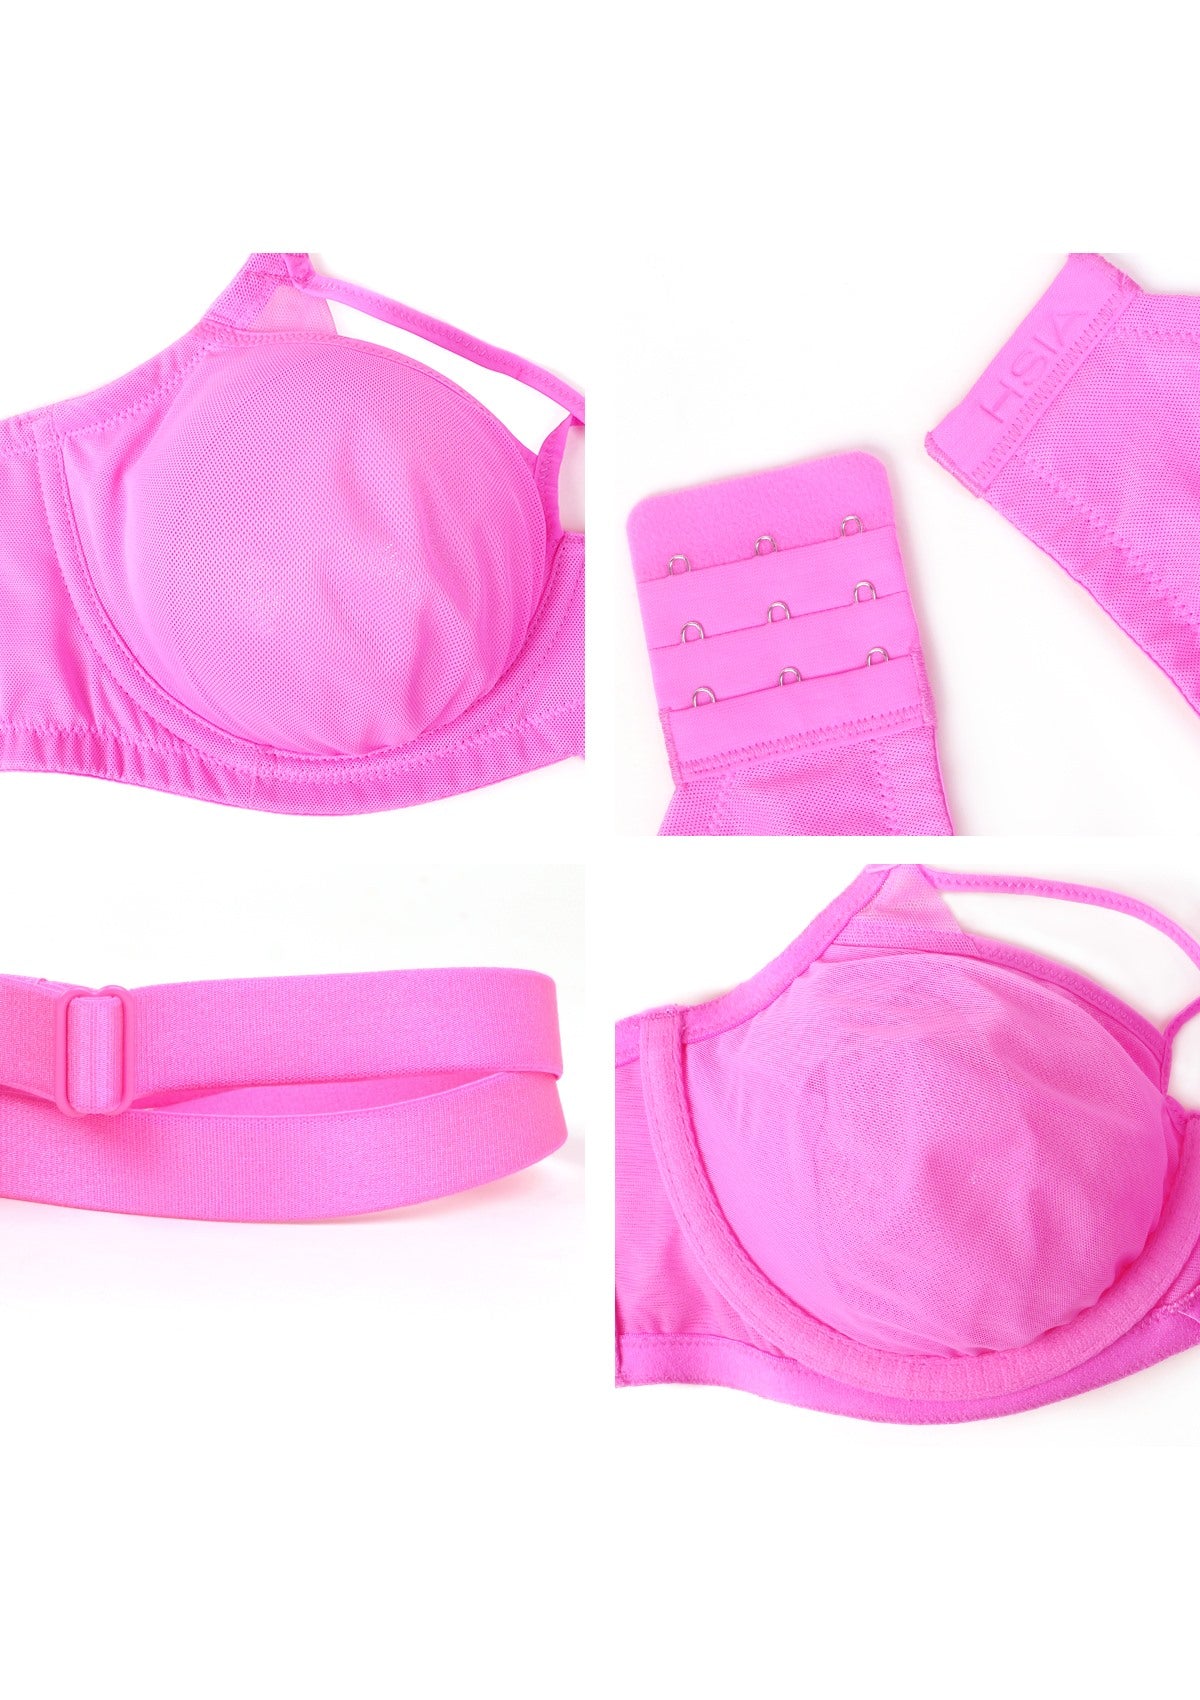 HSIA Billie Cross Front Strap Smooth Sheer Mesh Comfy Underwire Bra - Barbie Pink / 36 / I